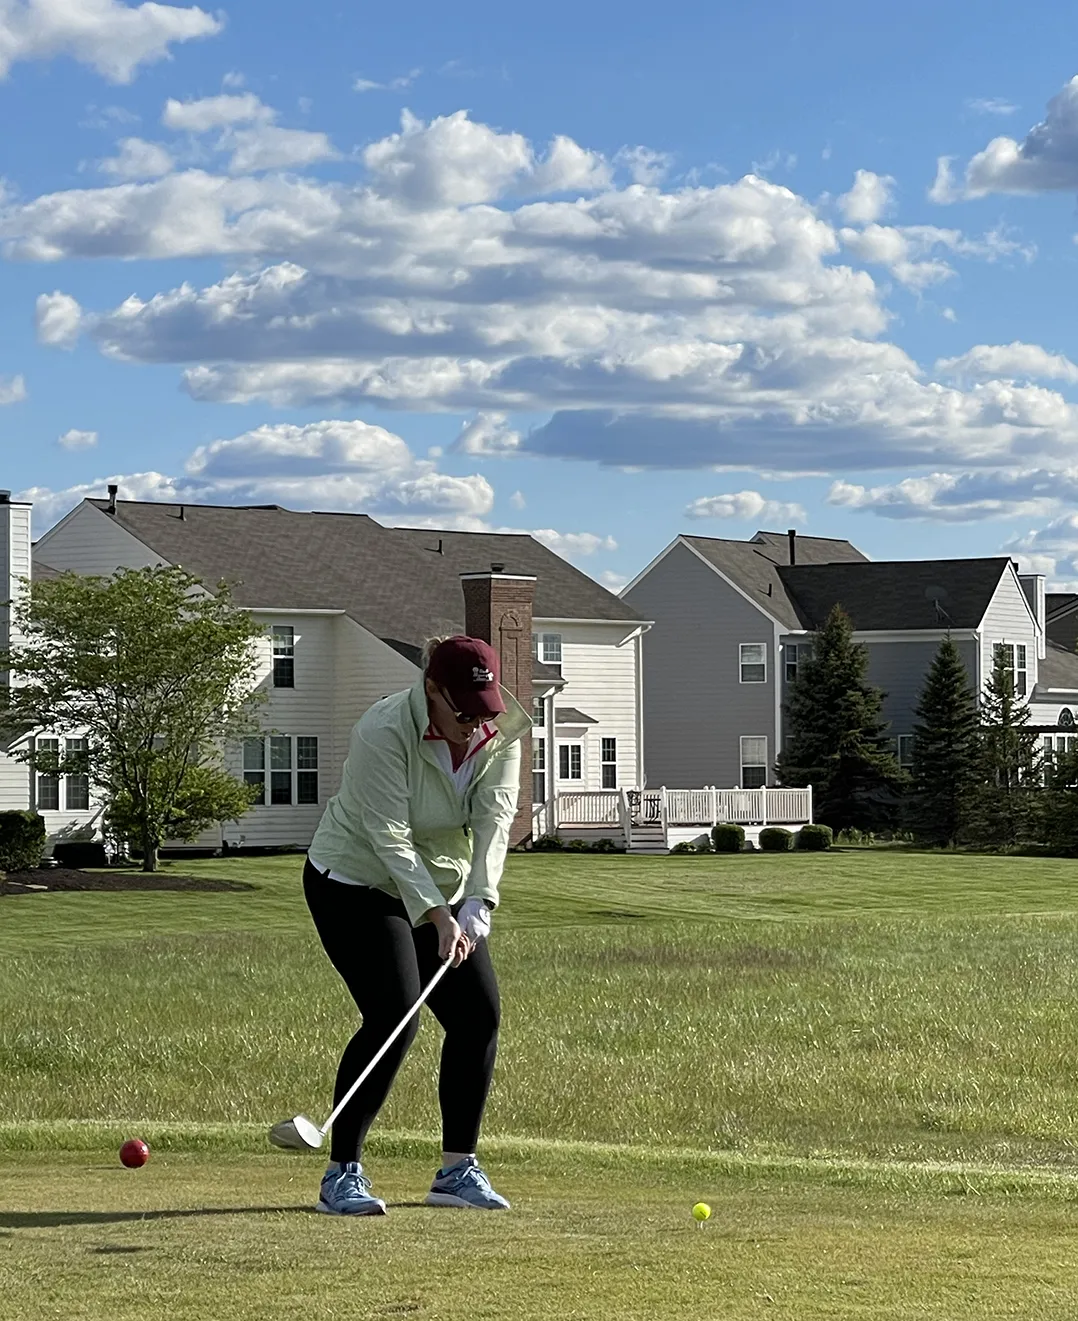 Just for fun: Geist Golf league players serious about keeping games lighthearted